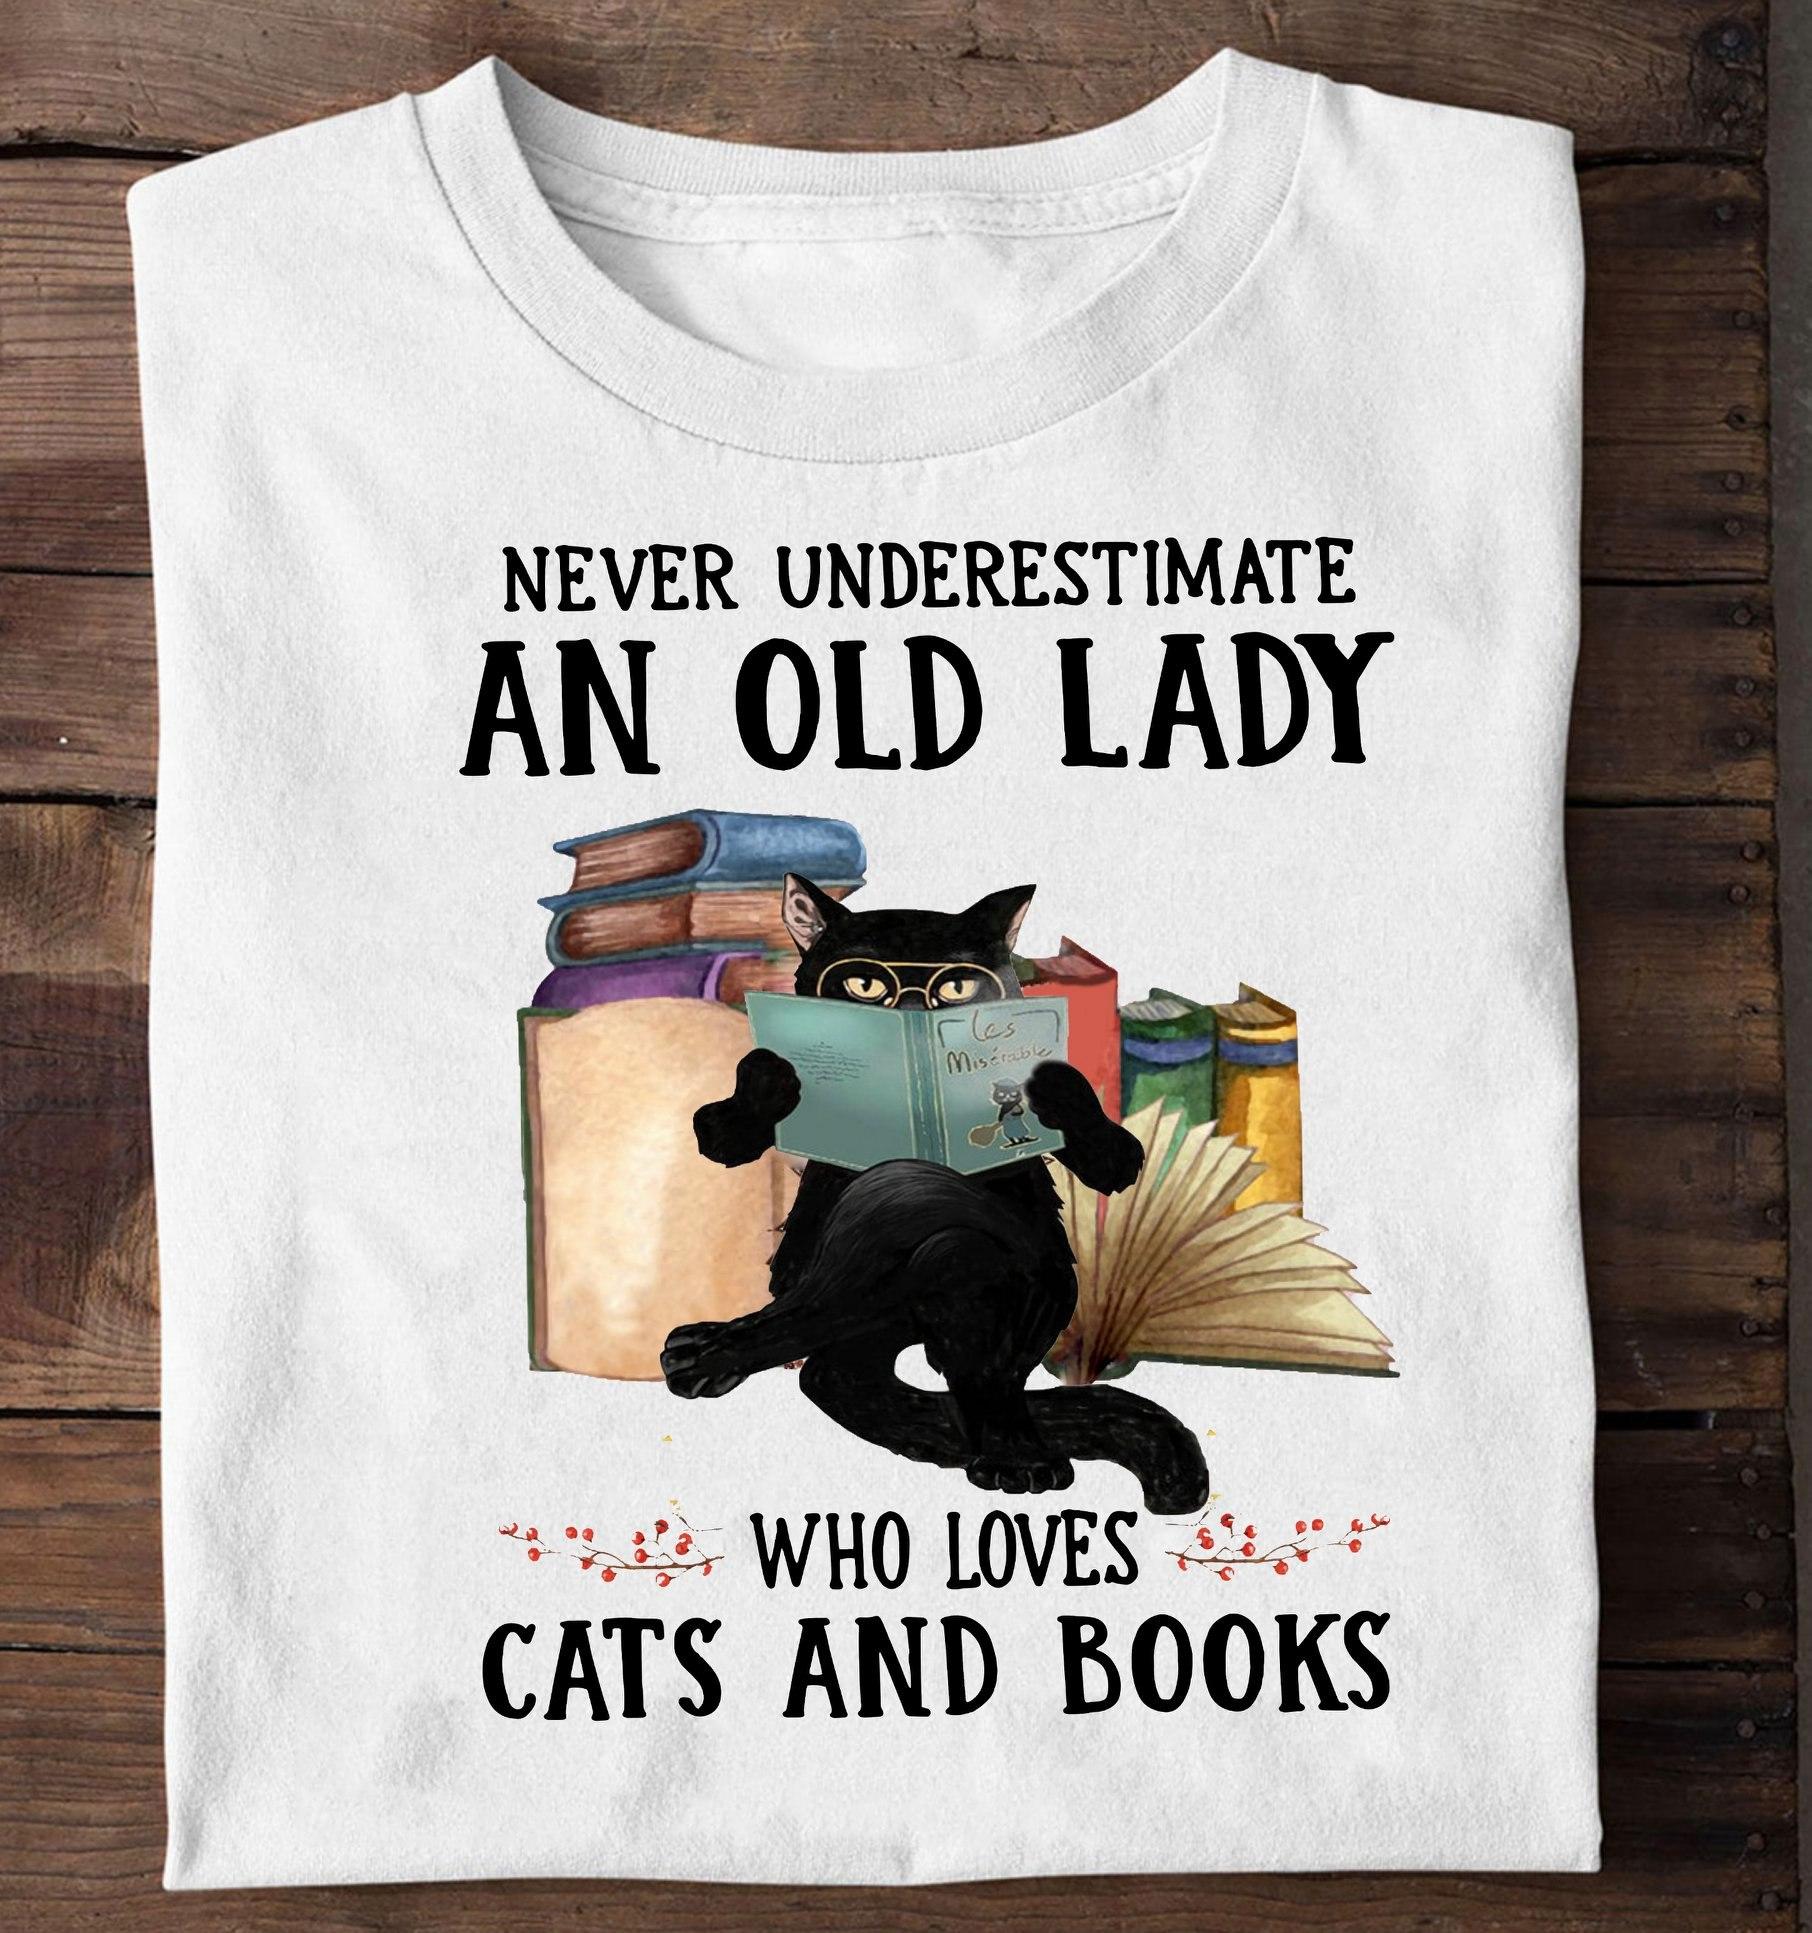 Never underestimate an old lady who loves cats and books - Black cat reading book, old lady bookaholic